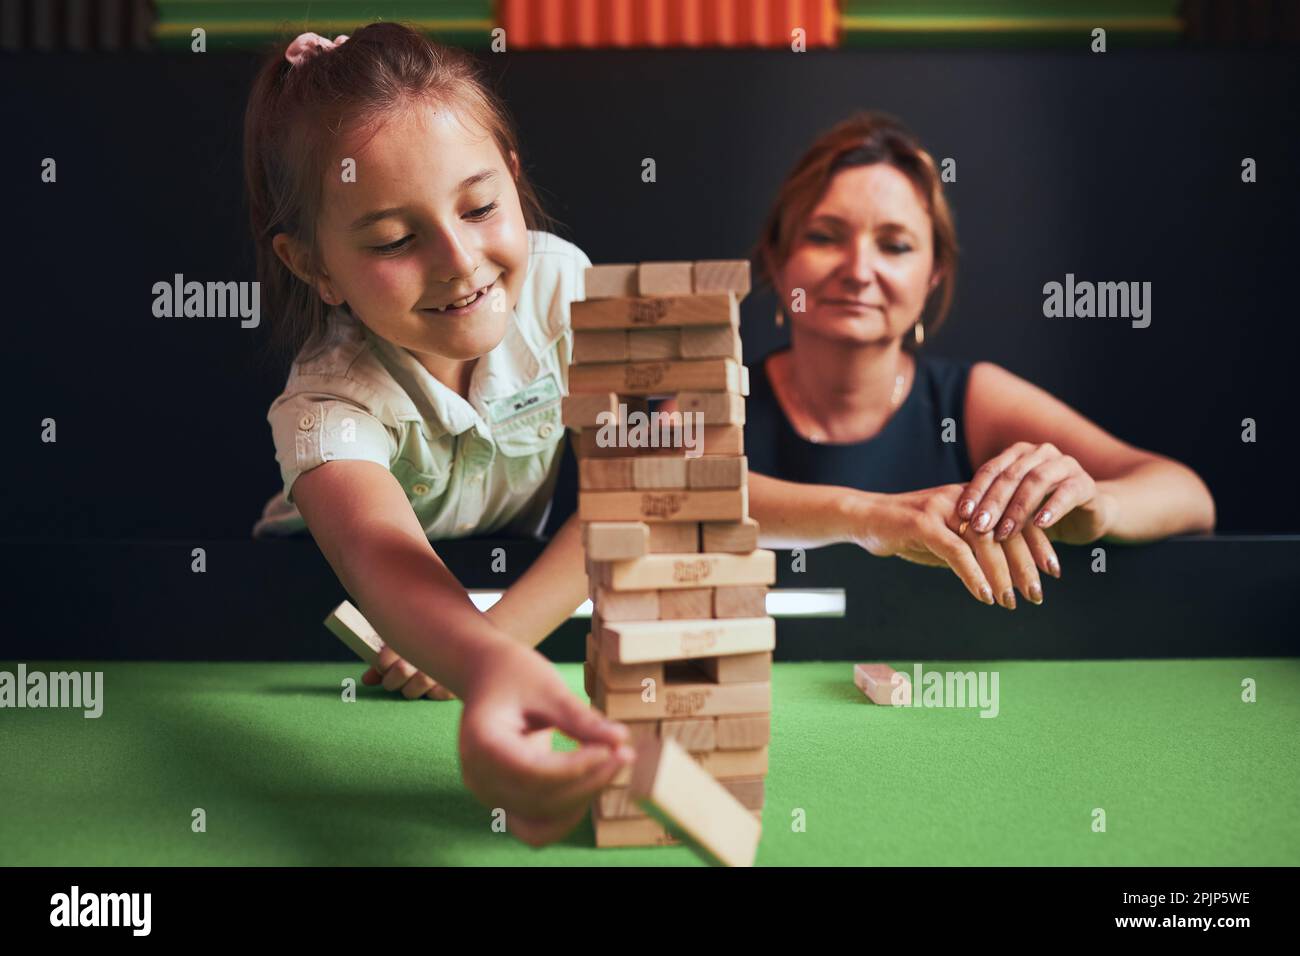 Mother and her daughter playing jenga game together in play room. Girl removing one block from stack and placing it on top of tower. Stacked wooden bl Stock Photo